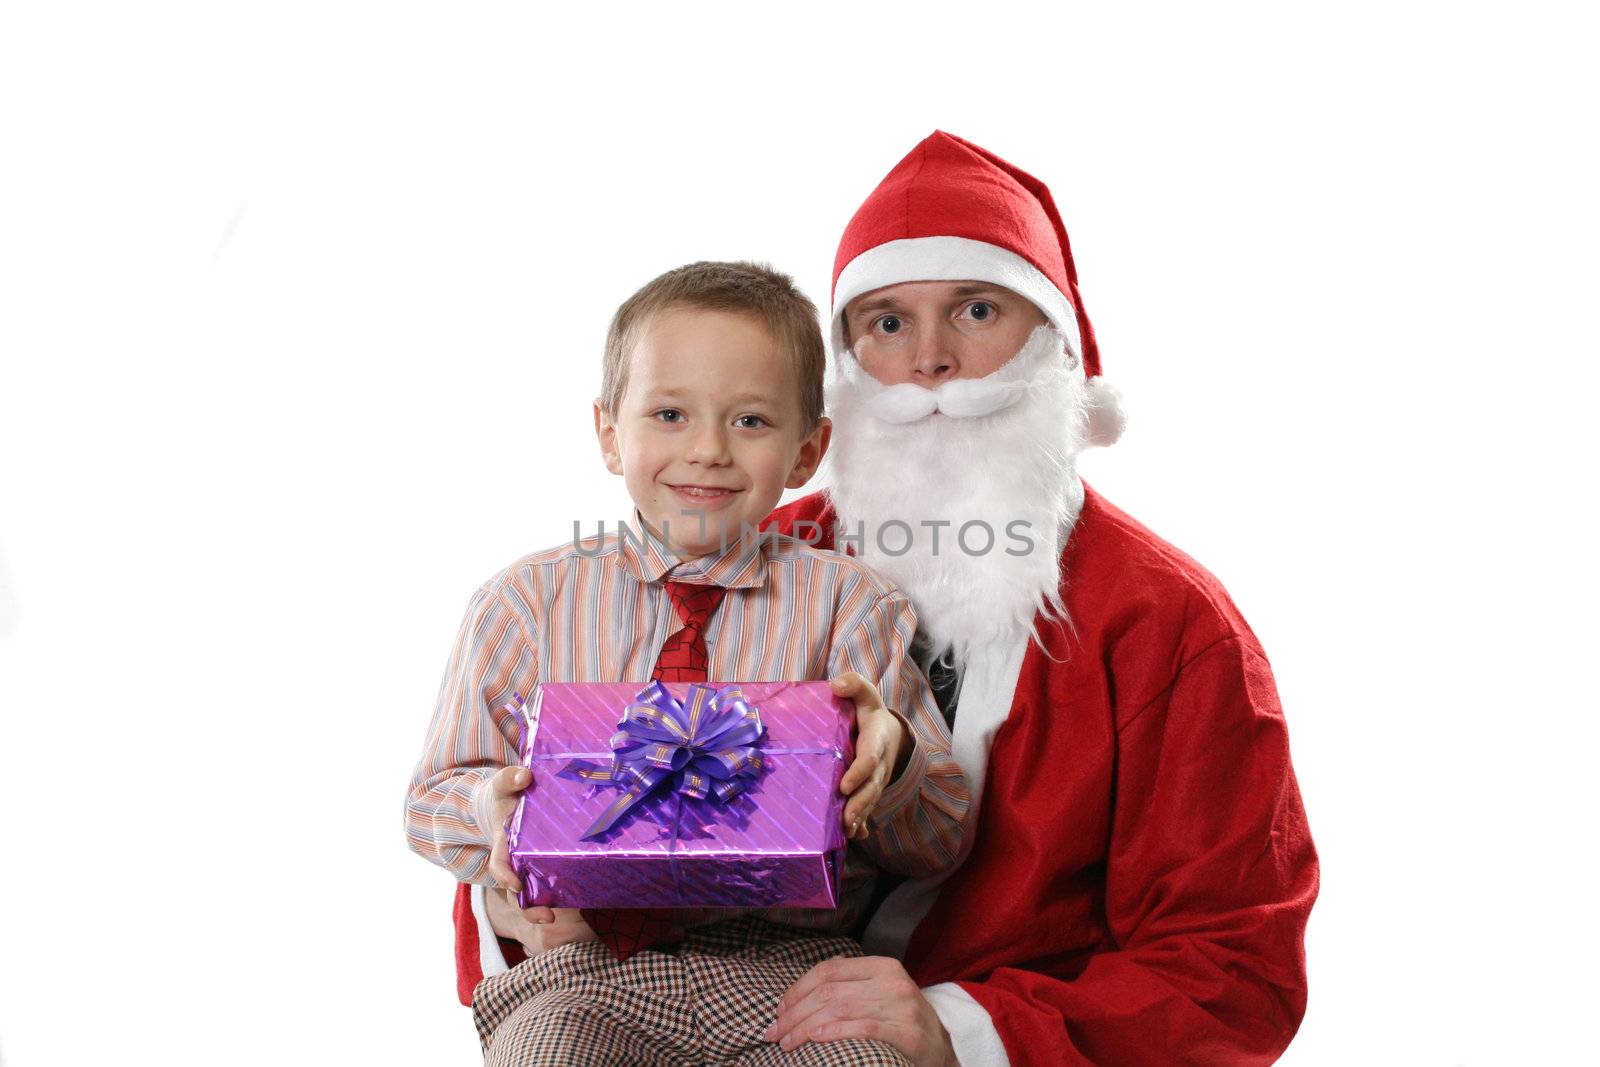 Santa poses with the little boy and a gift on a white background